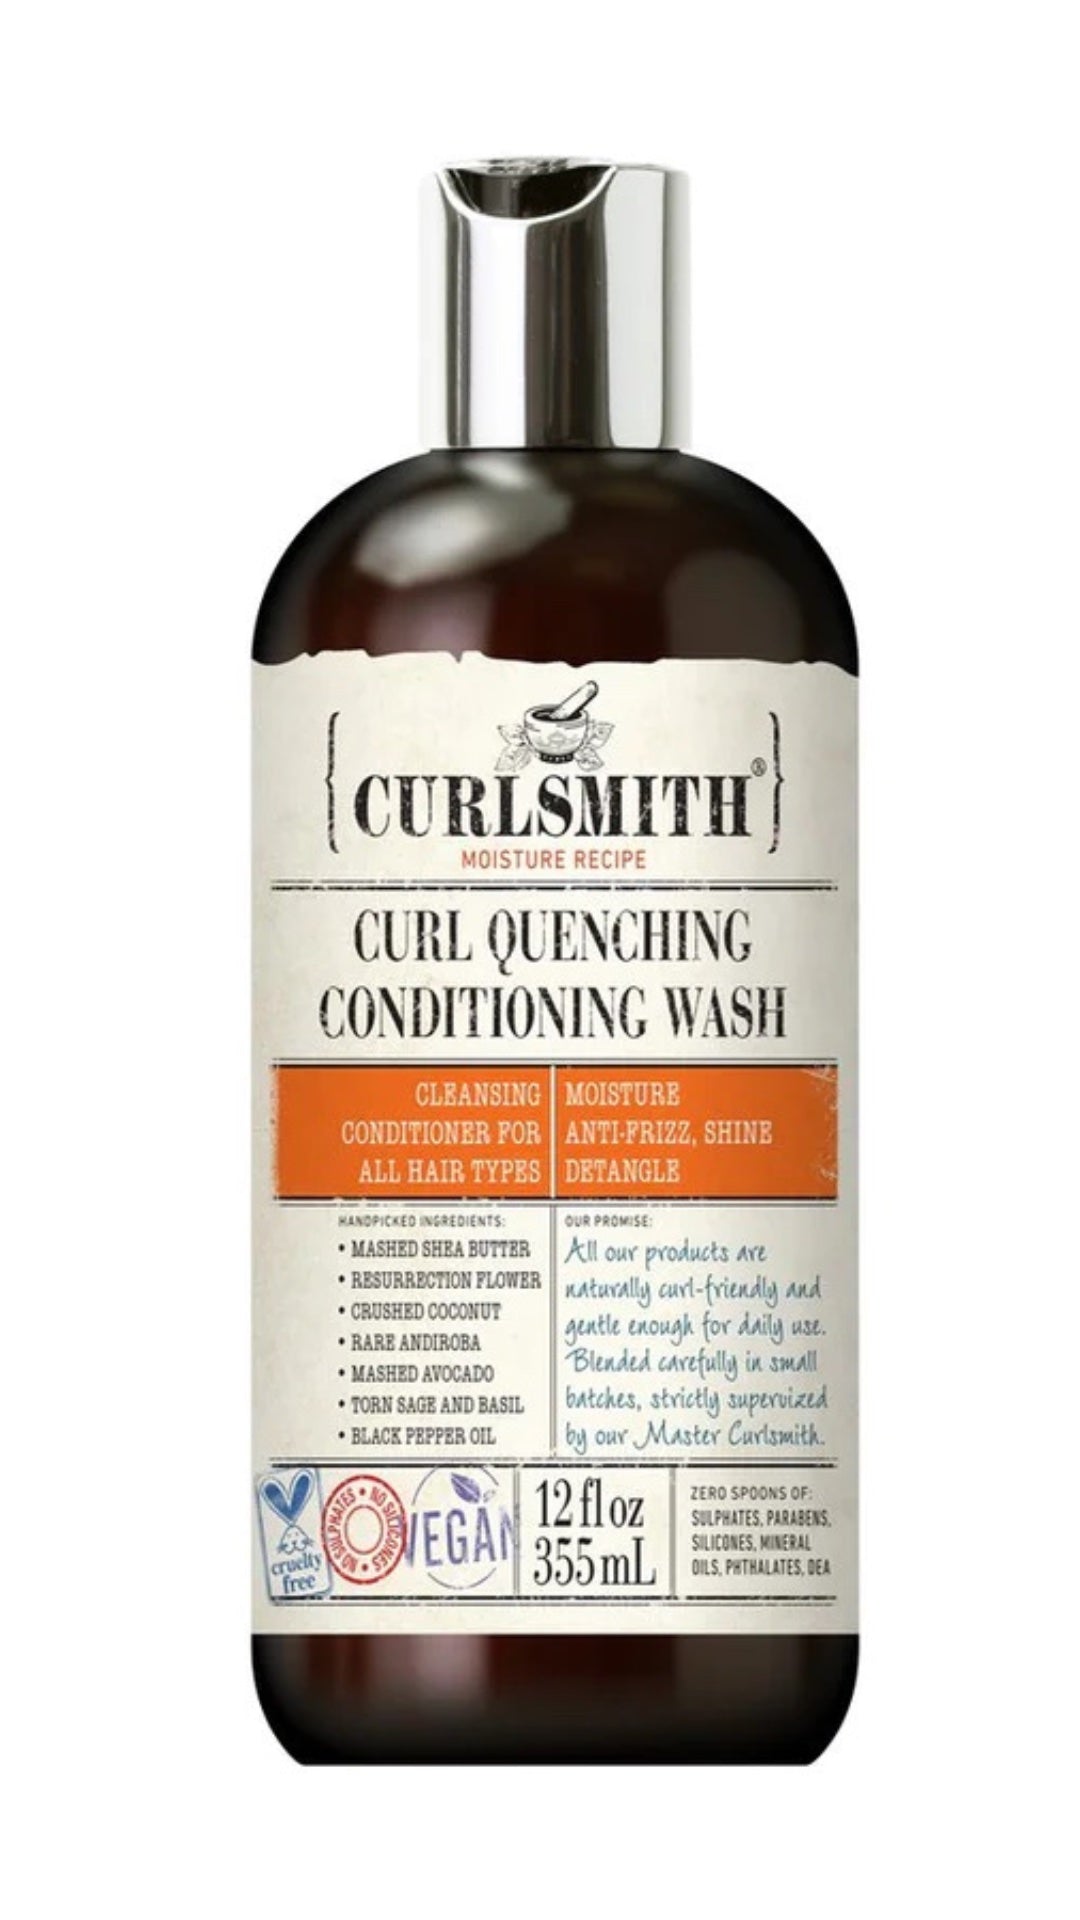 CURLSMITH, Curl Quenching Conditioning Wash